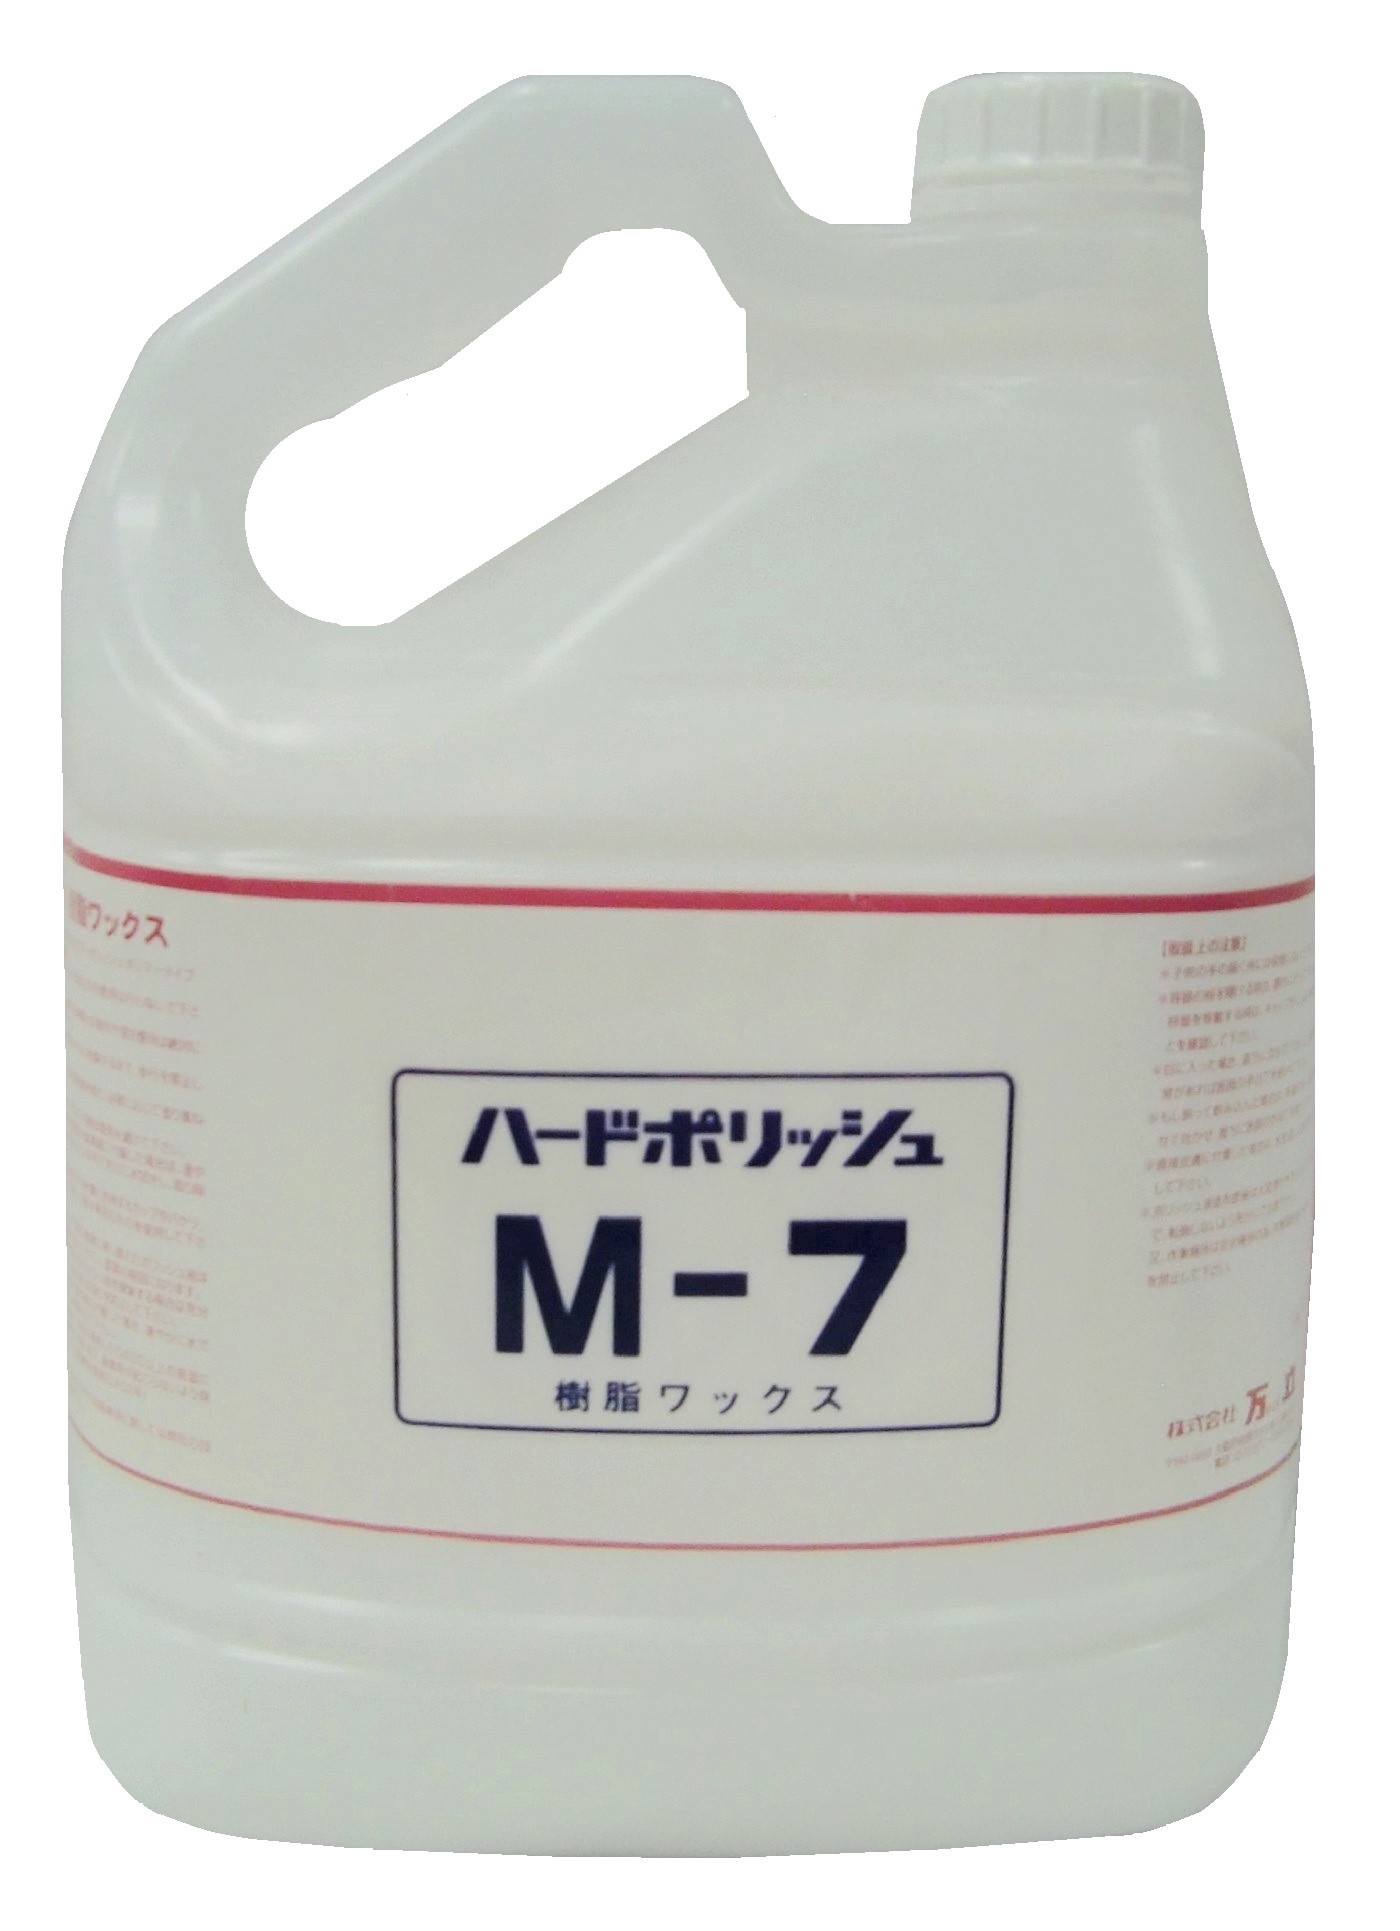 Hakuba M-7 4L  Resin wax for classrooms and gymnasiums: Non-slip